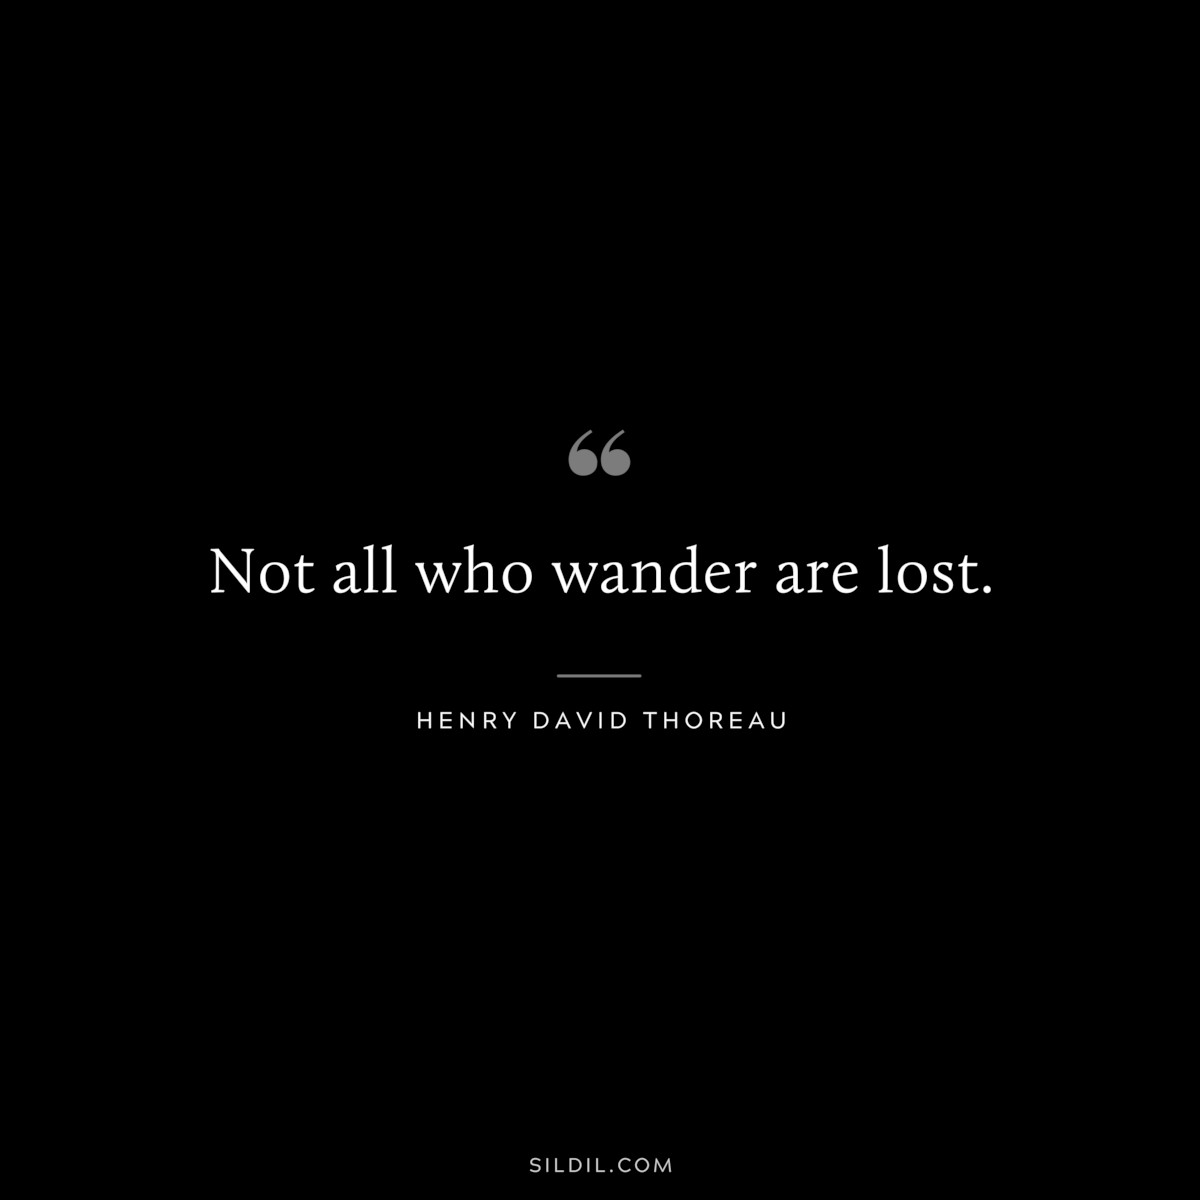 Not all who wander are lost. — Henry David Thoreau